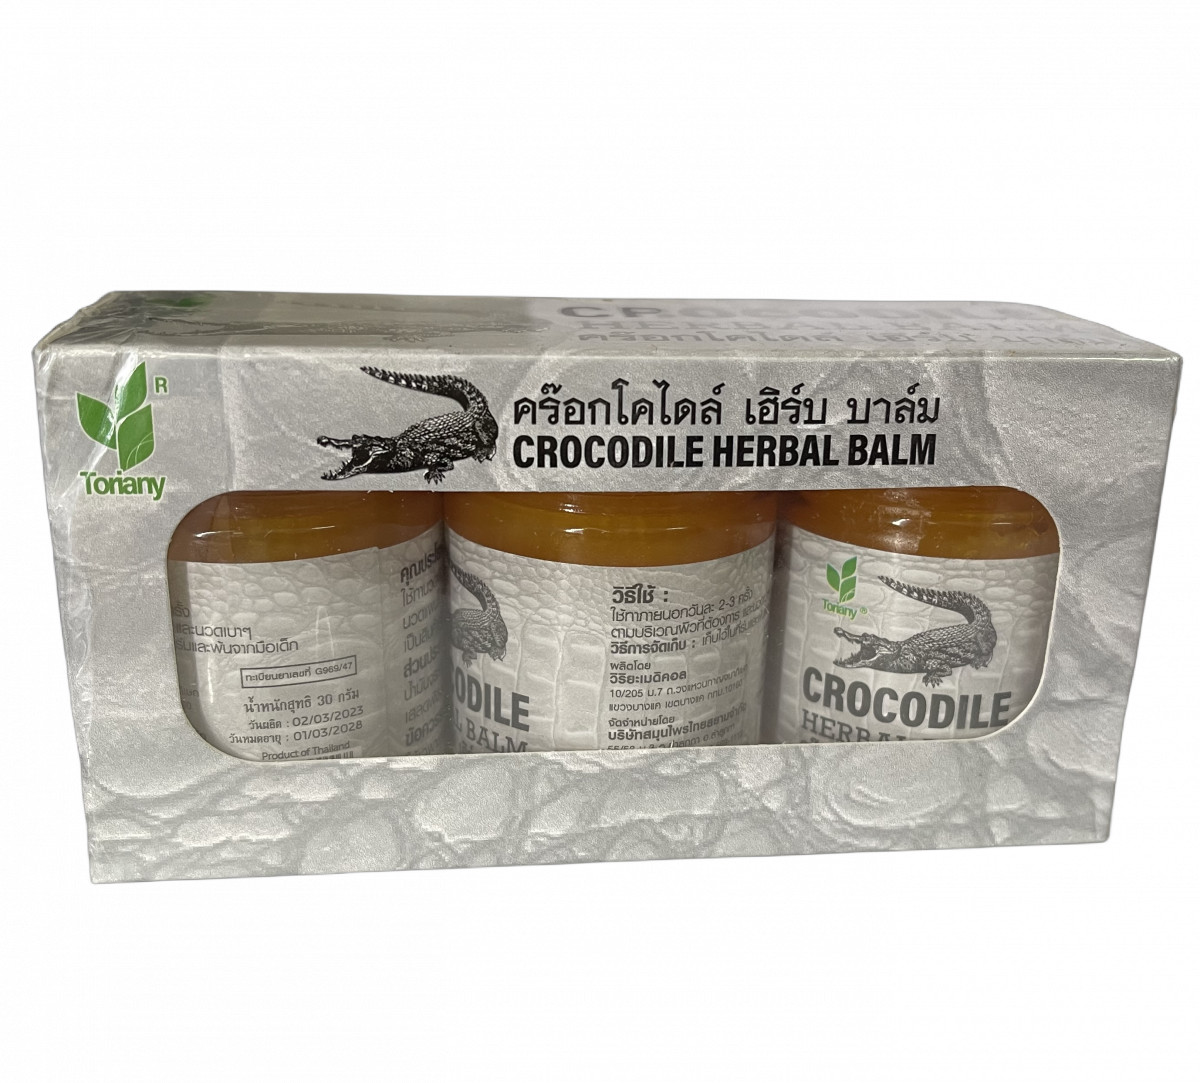 Thailand's original authentic crocodile cream marks 30g package, a set of 3 bottles